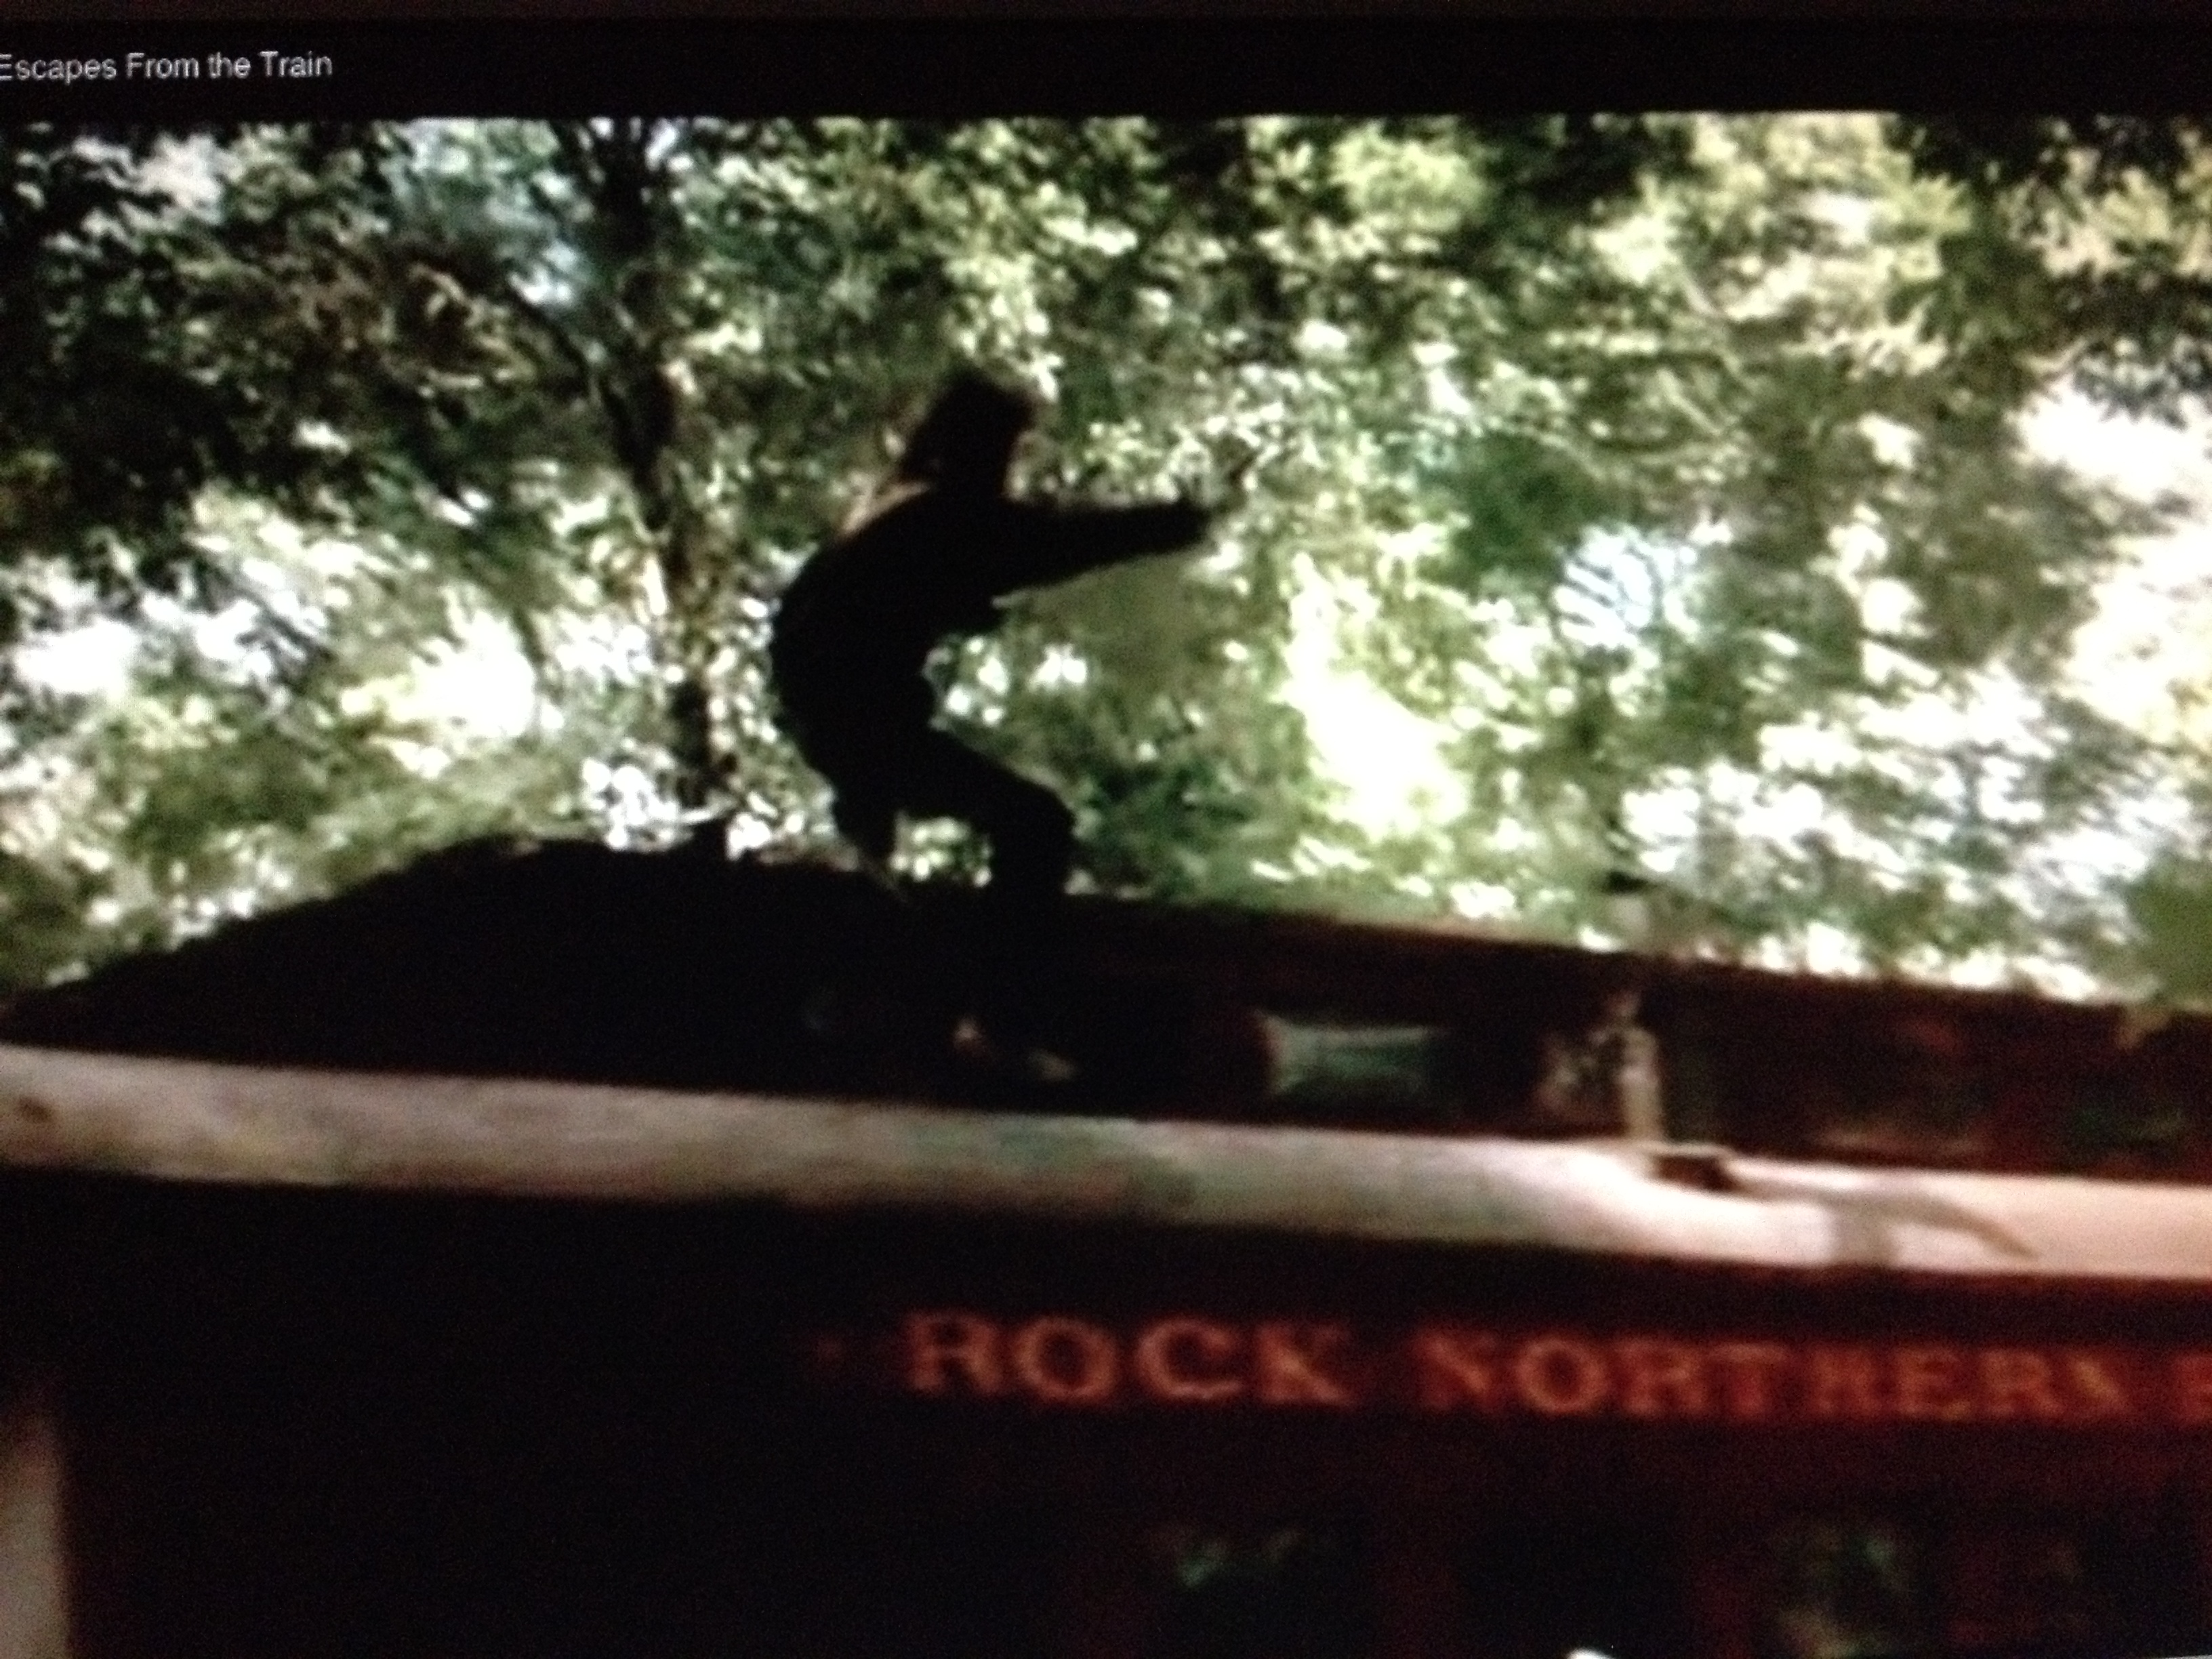 Swing from the train on American Outlaw doubling Colin Farrell